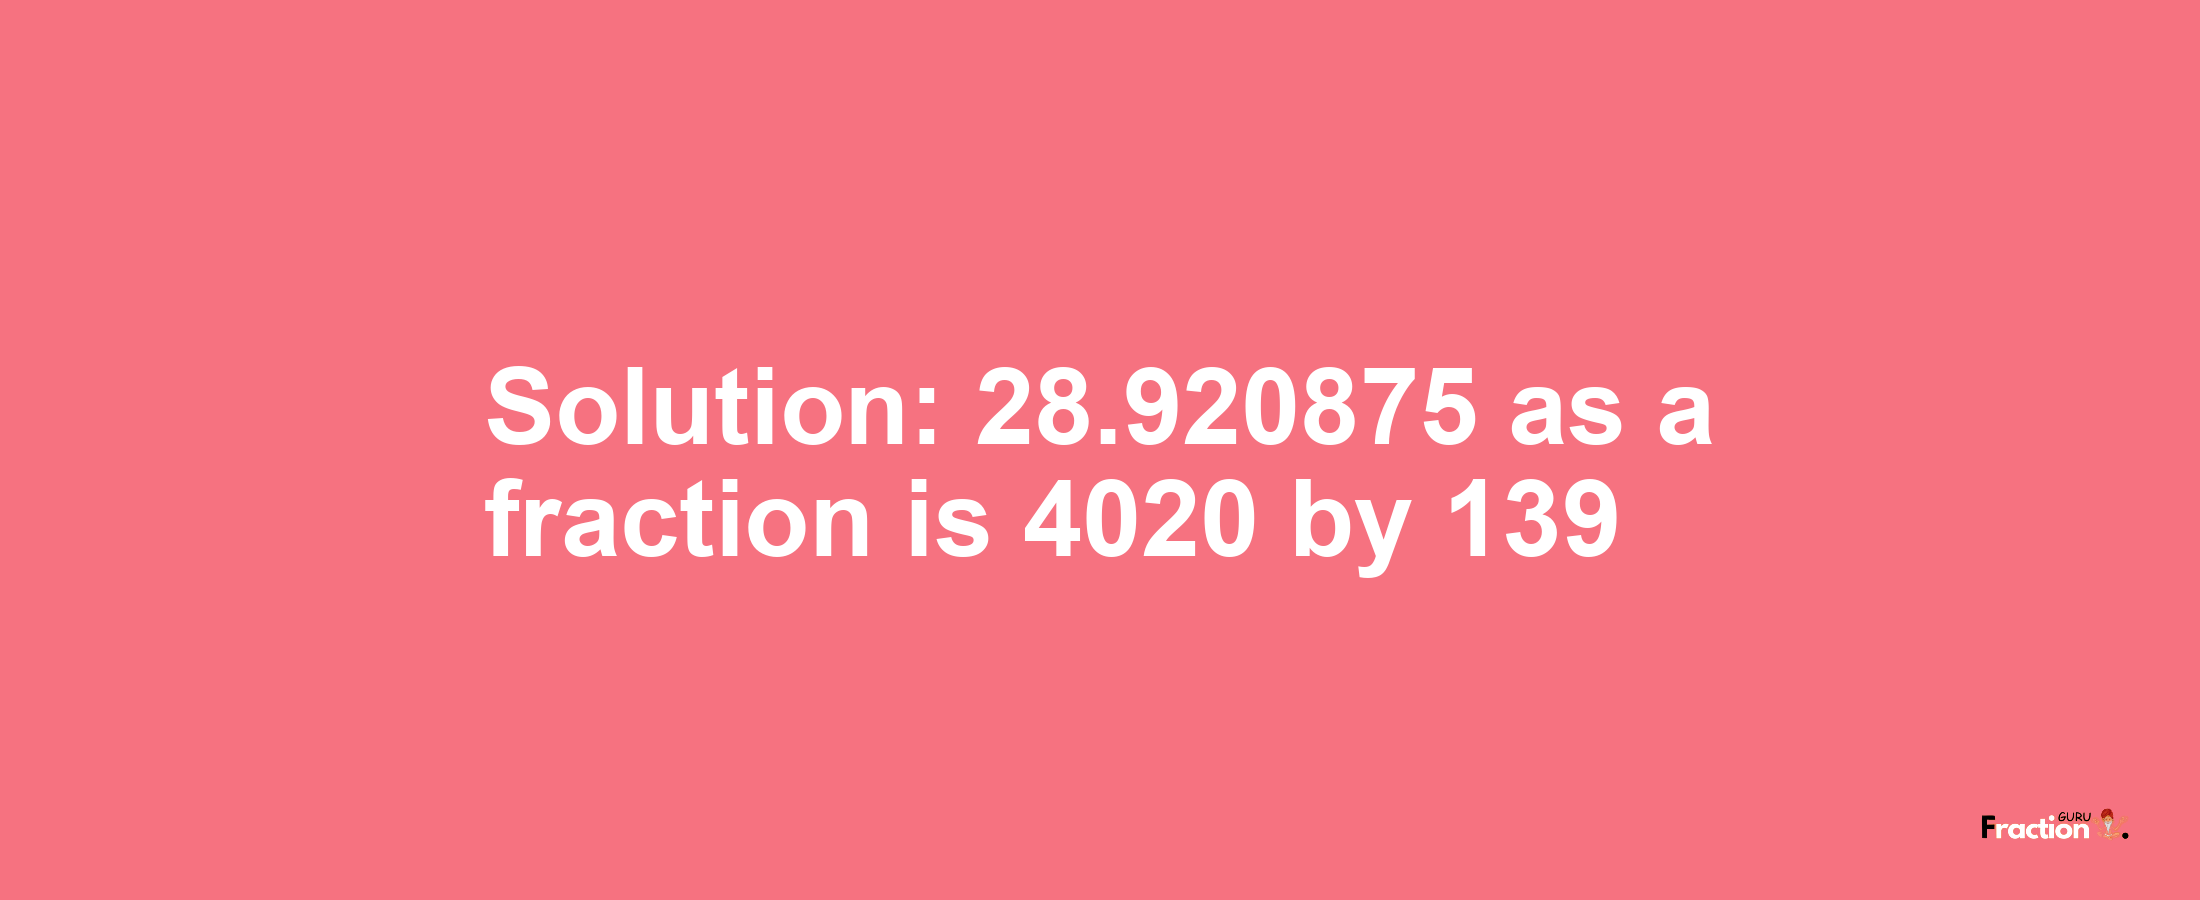 Solution:28.920875 as a fraction is 4020/139